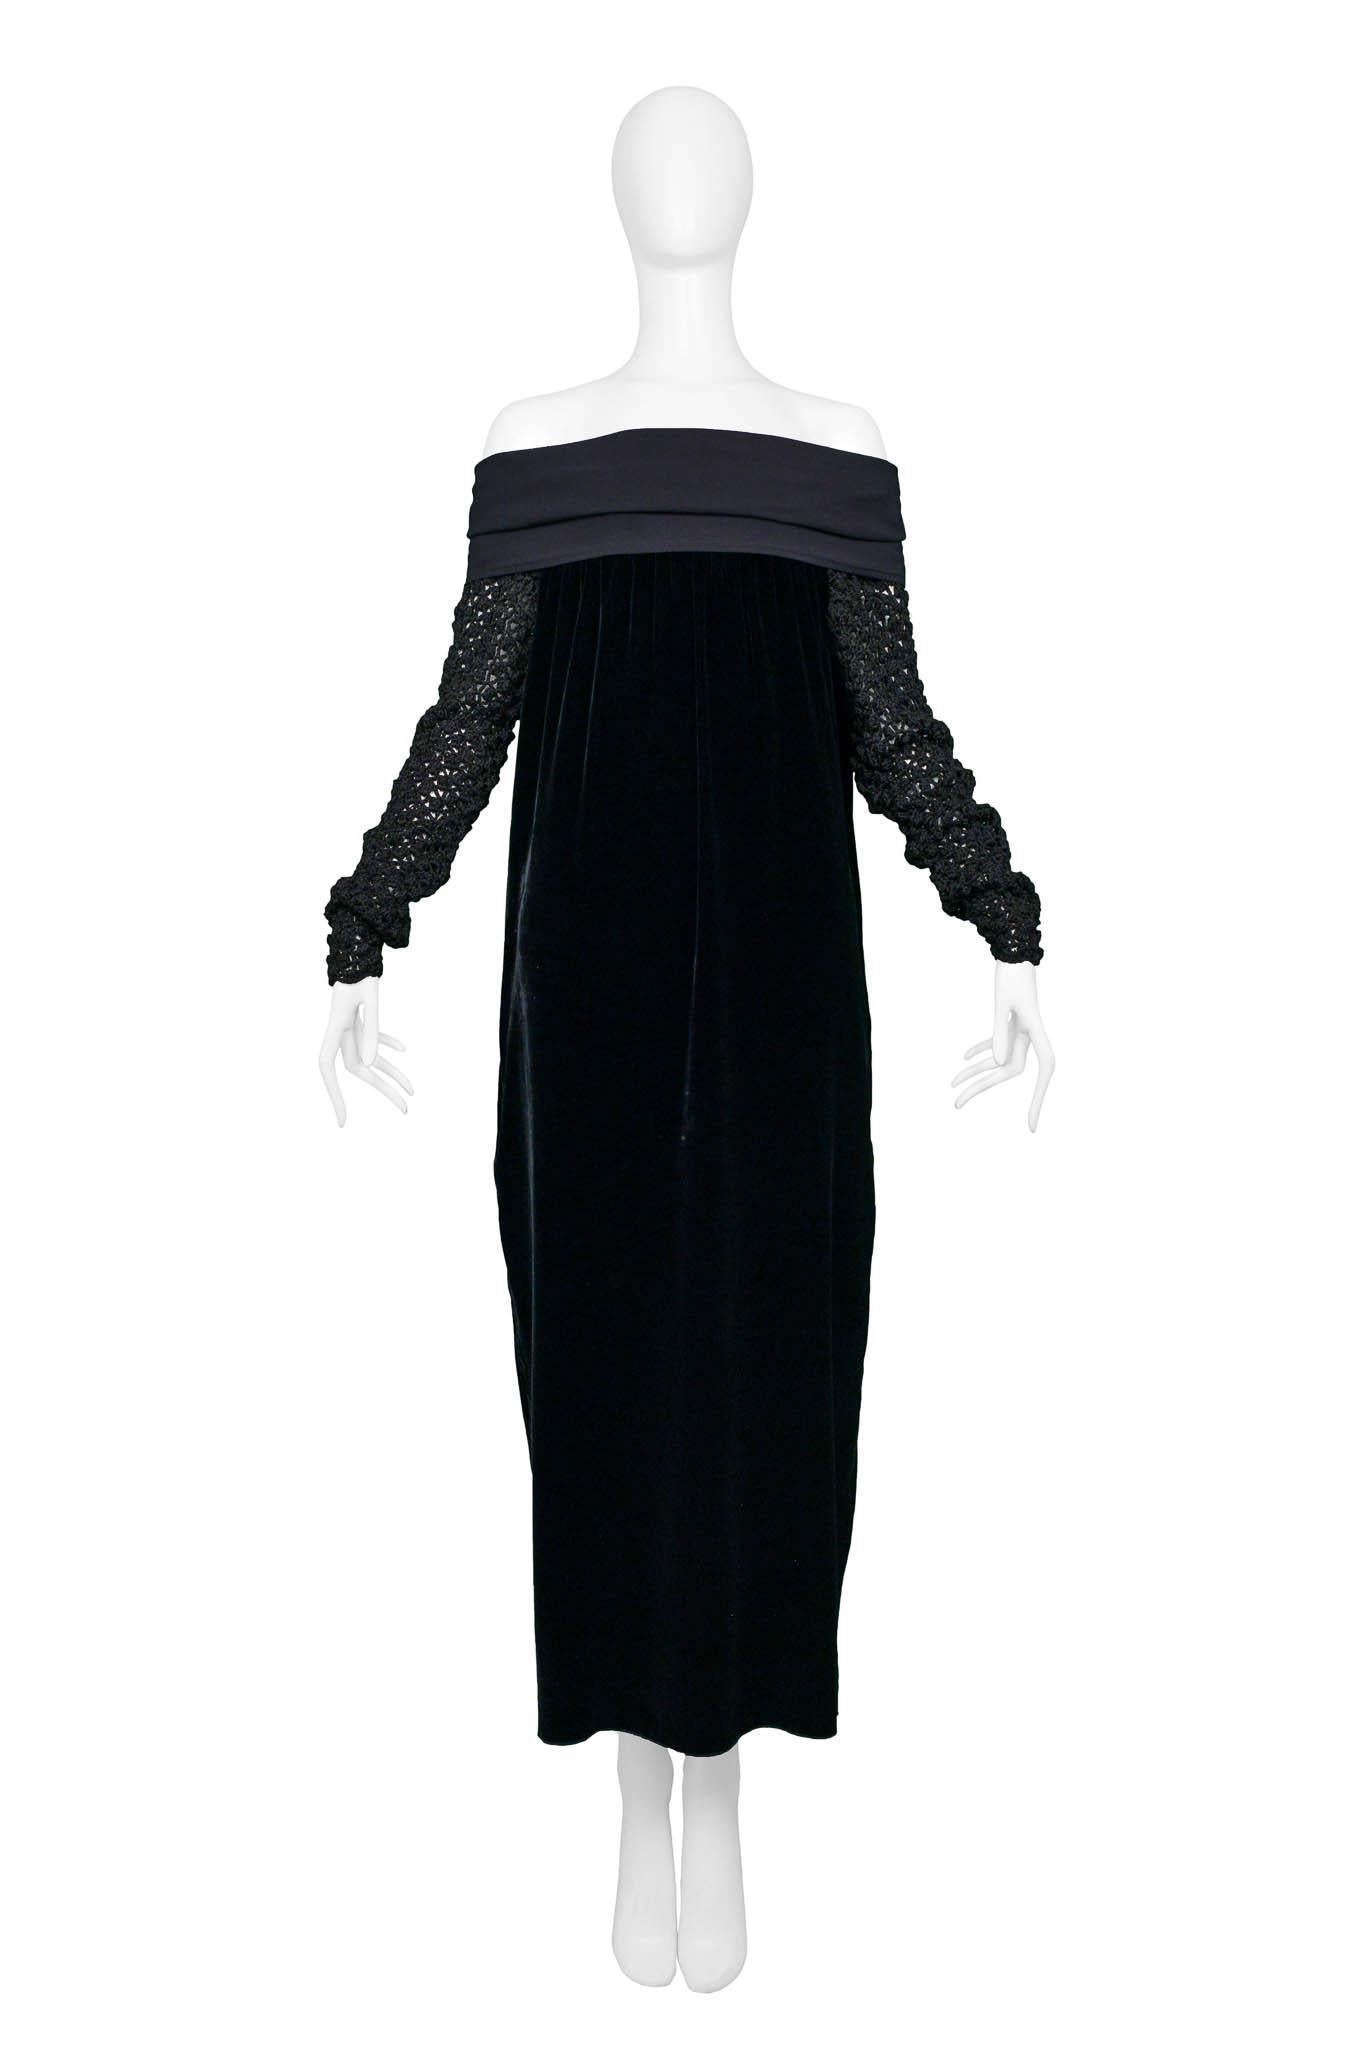 Resurrection Vintage is excited to offer a vintage Jean Paul Gaultier black velvet dress featuring an off-the-shoulder collar, chunky knit sleeves, easy body, and ankle length.

Jean Paul Gaultier
Size 40
Fabric 51% Rayon, 20% Cotton, 18% Silk, 8%